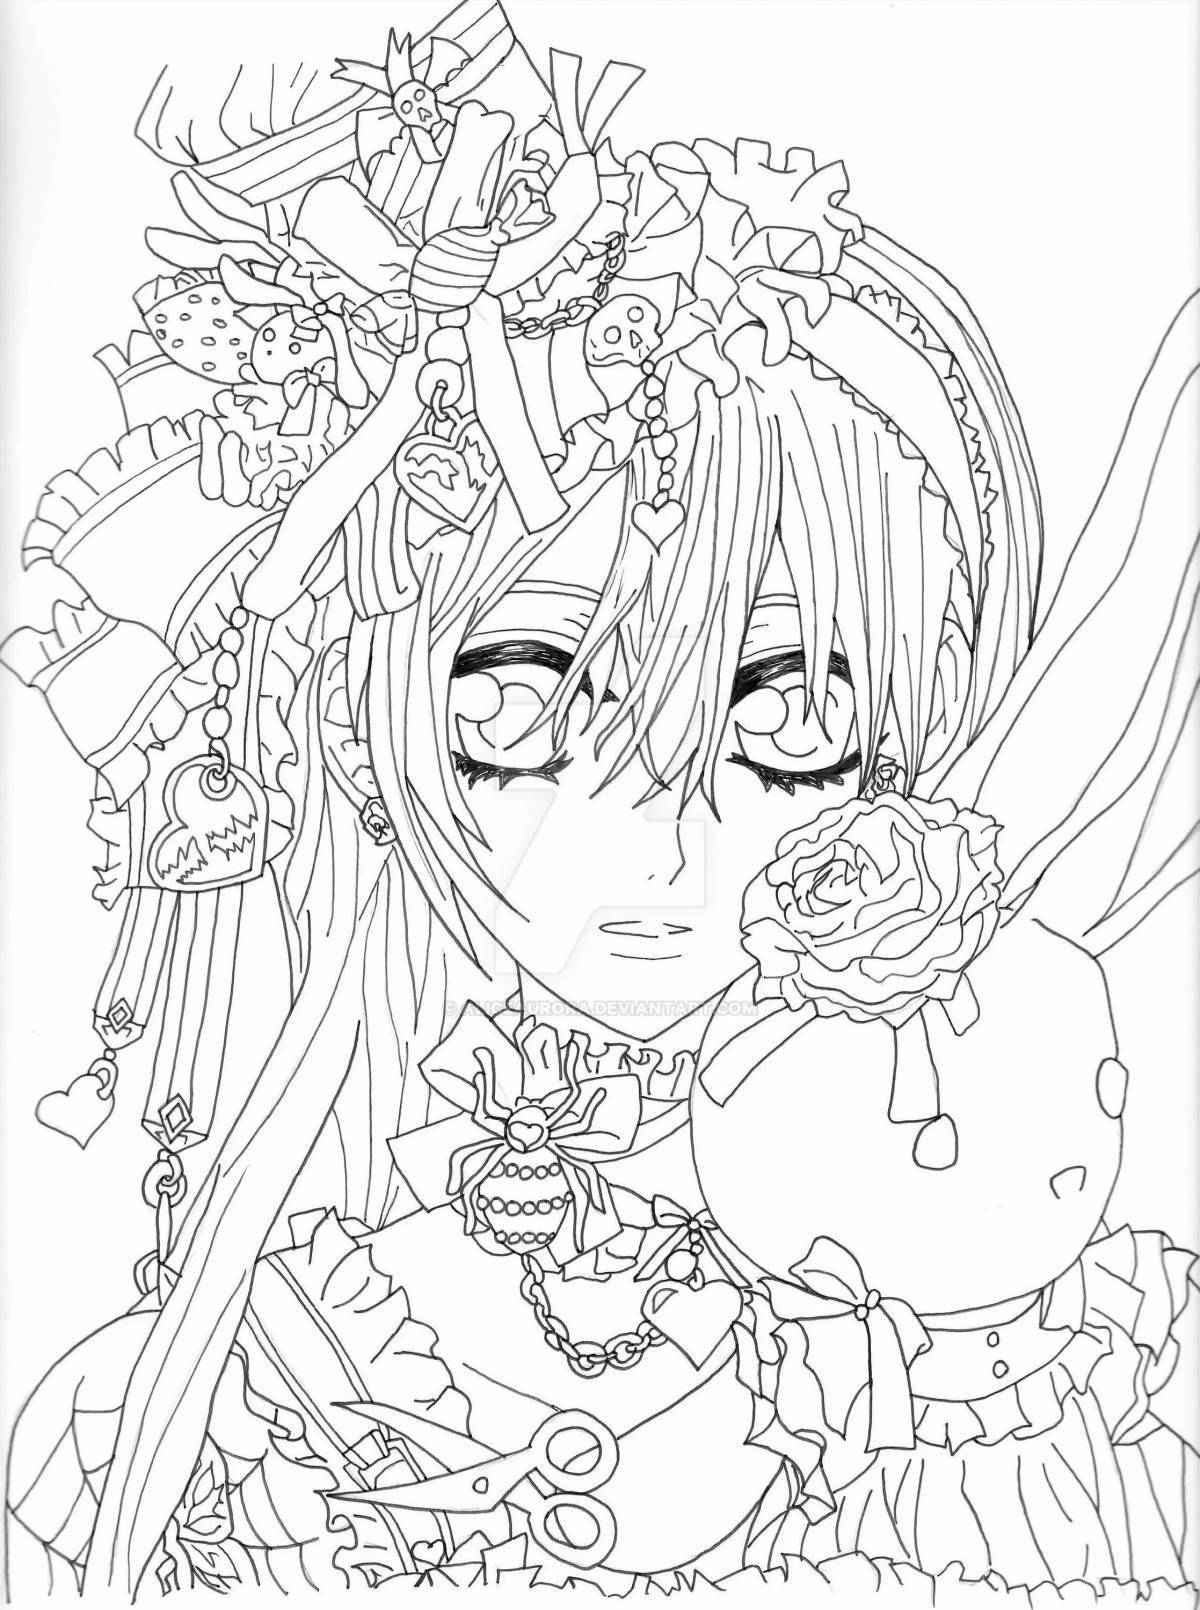 Radiant anime antistress coloring book